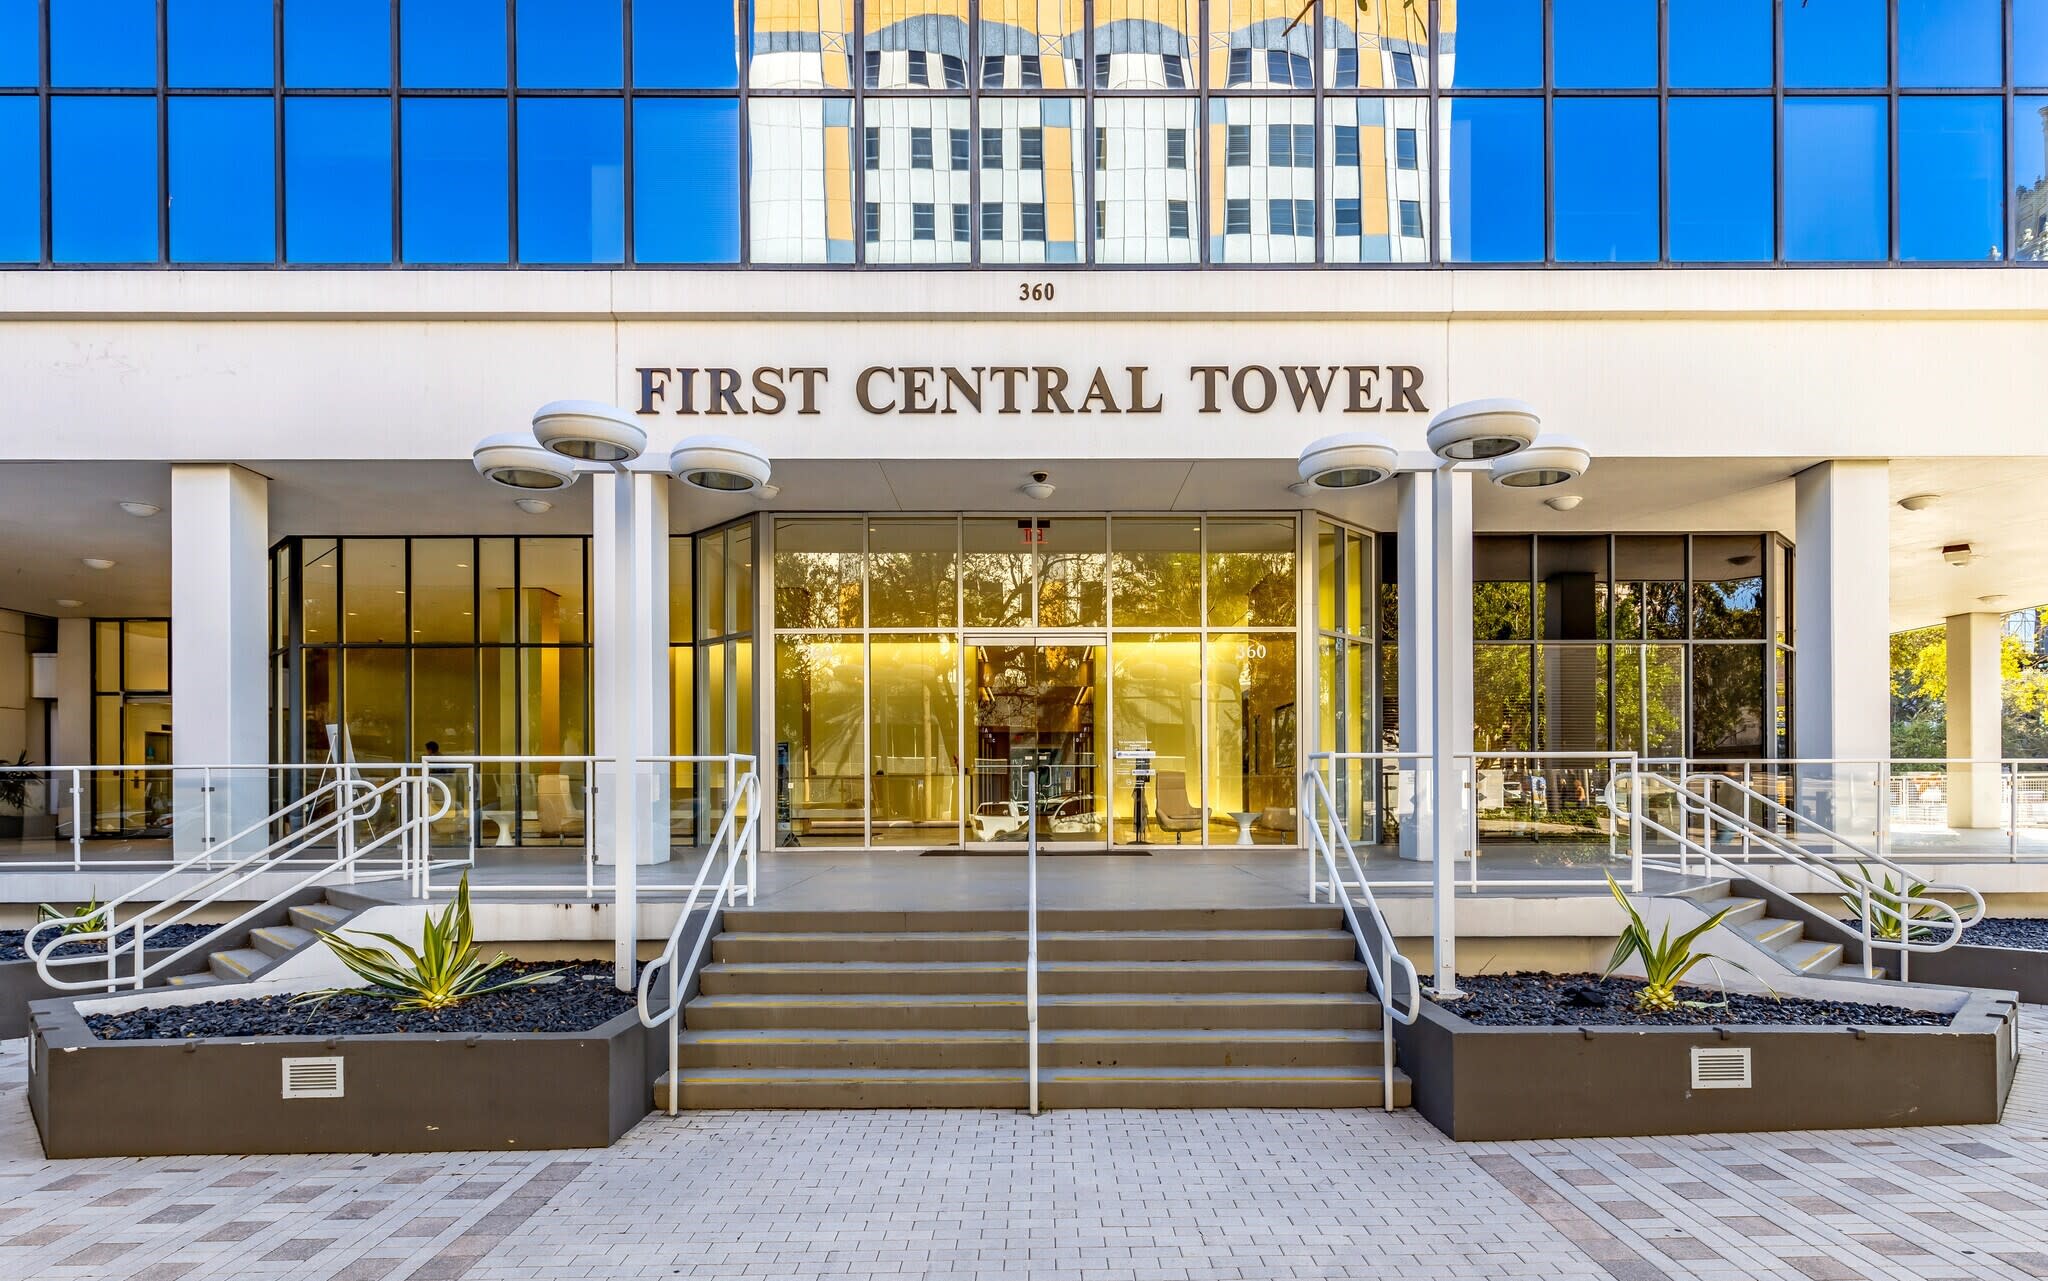 Providence's St. Petersburg Office is Located in the First Central Tower